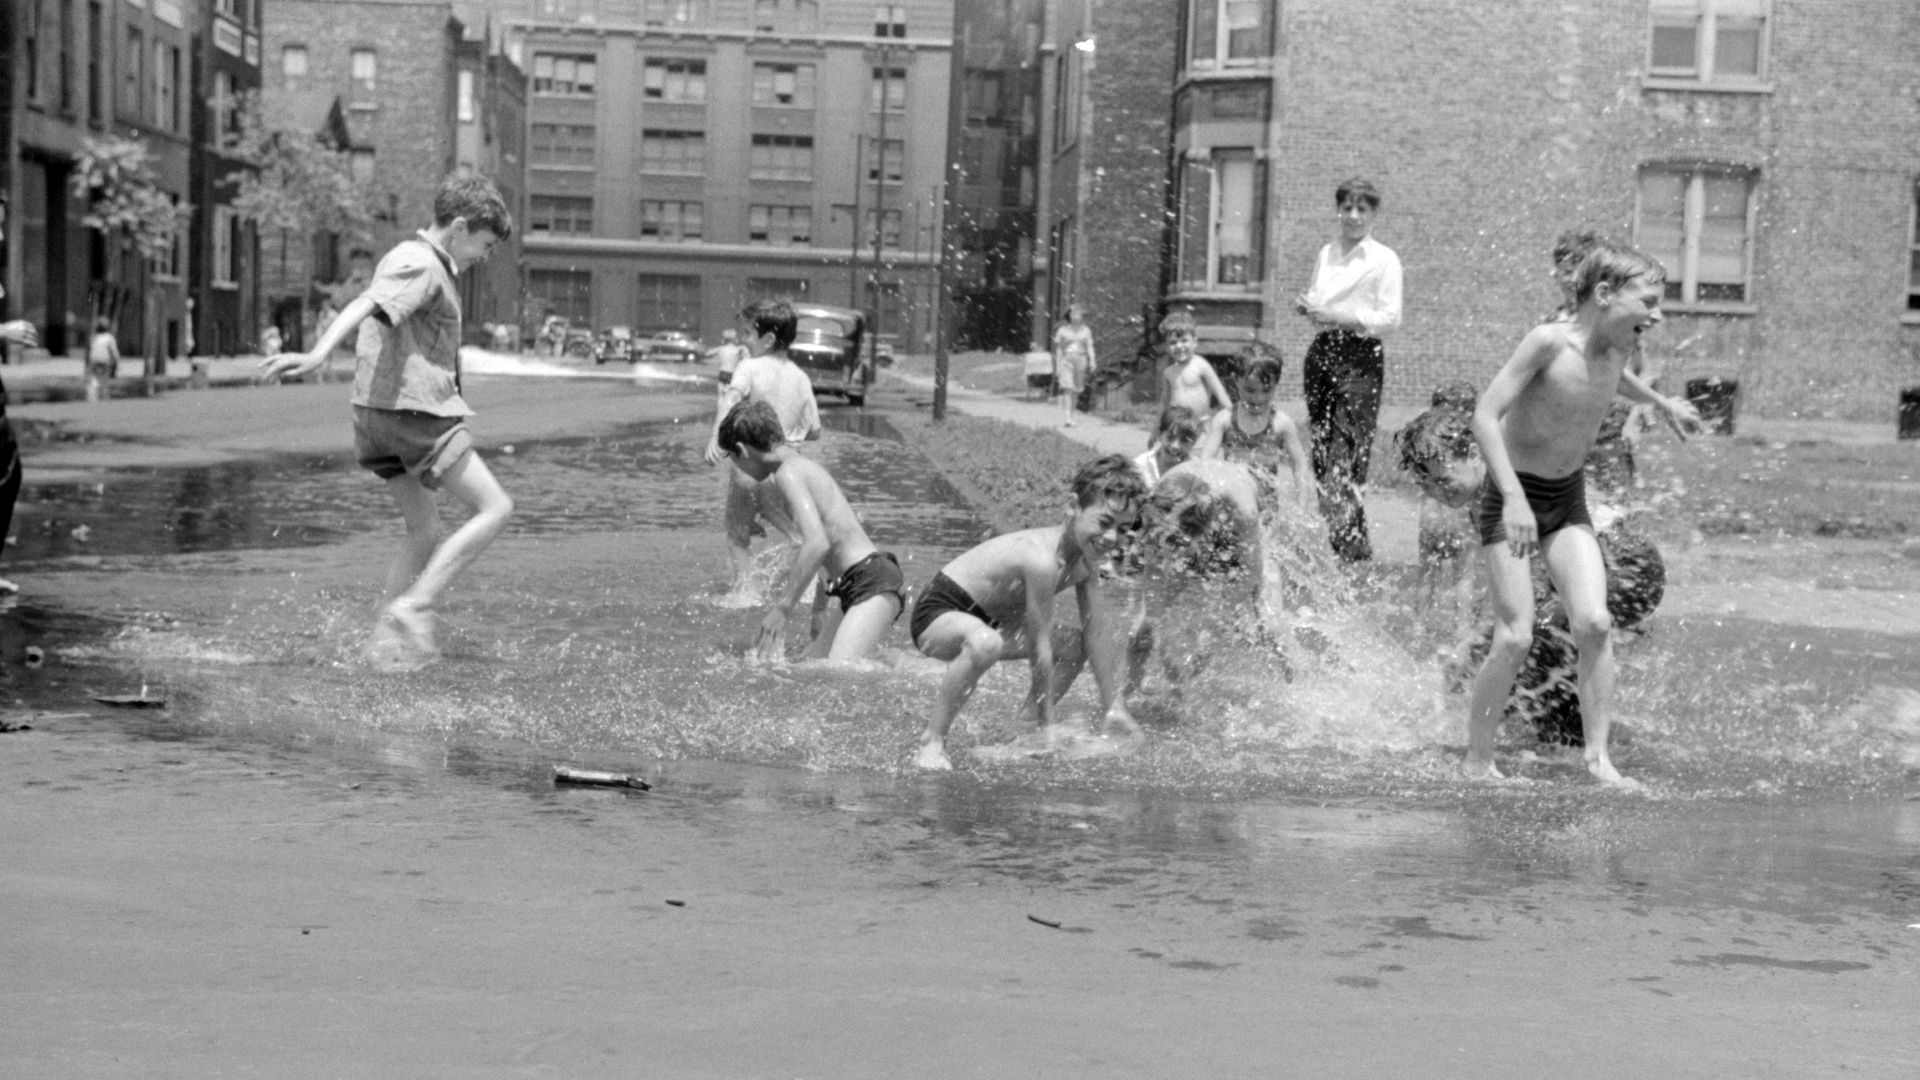 Black and white photo of kids playing in water in the street in 1947